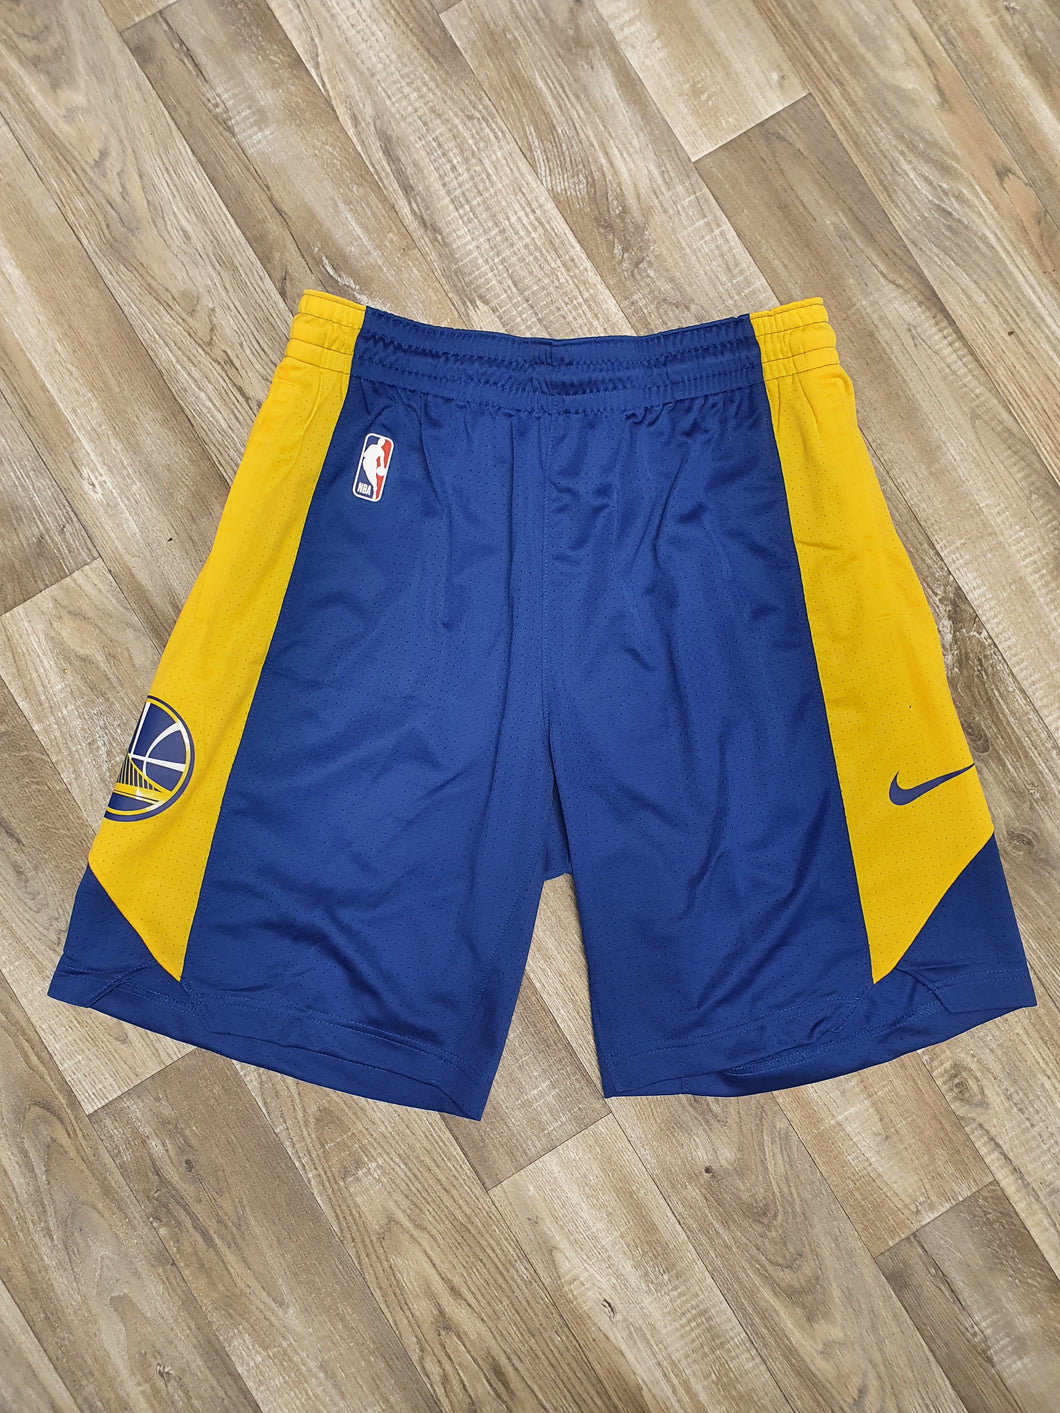 Golden State Warriors Shorts Size Large